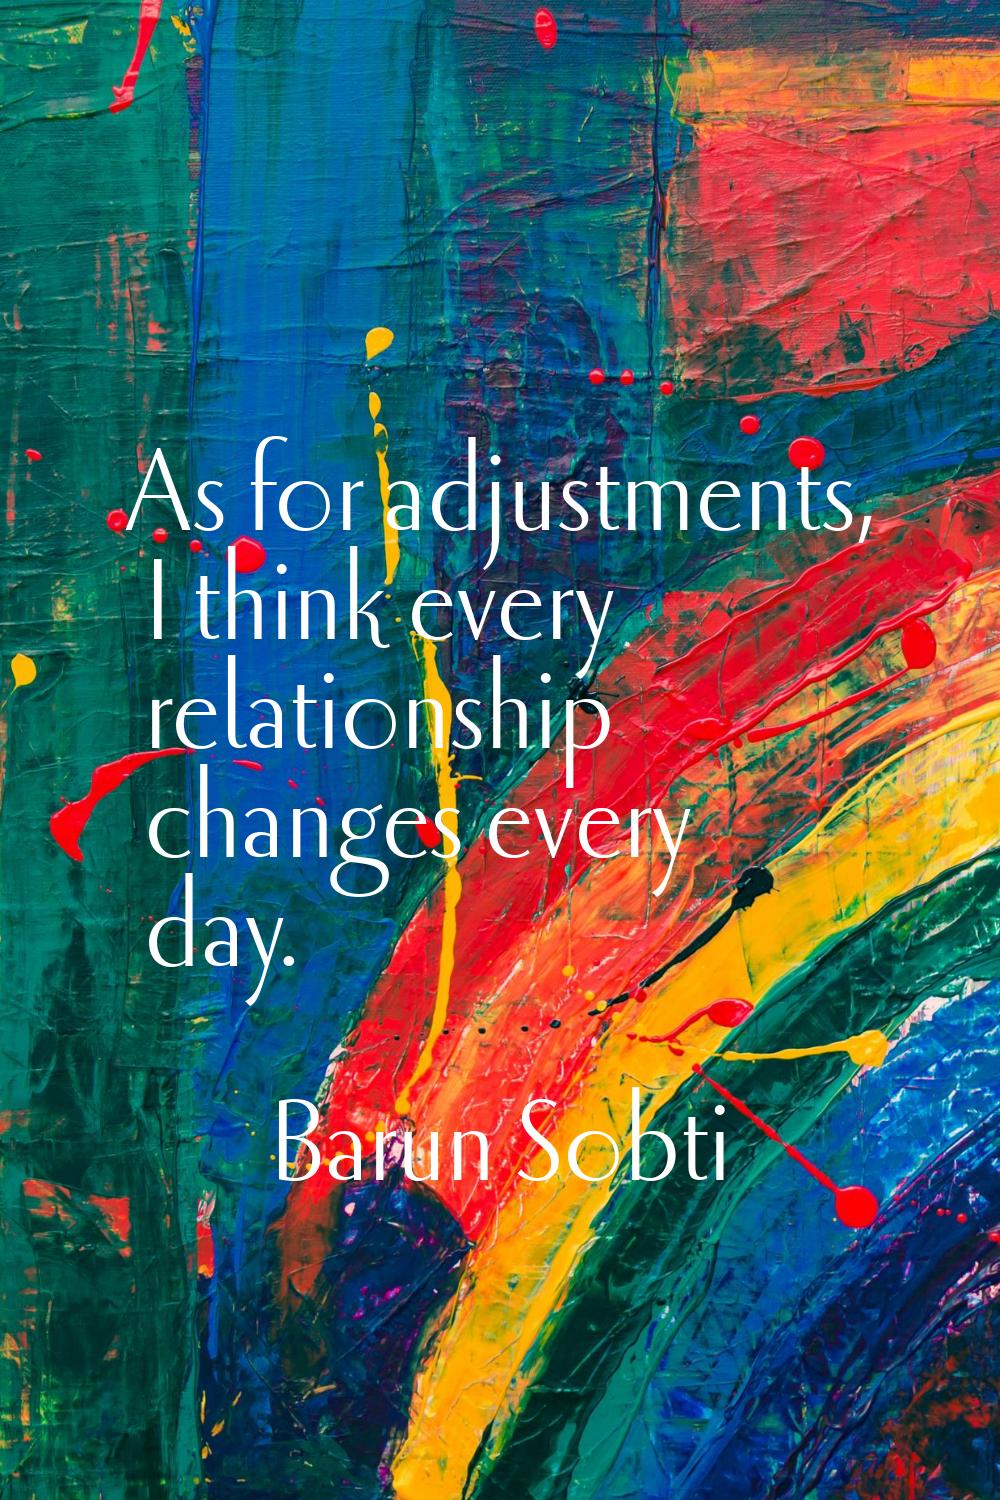 As for adjustments, I think every relationship changes every day.